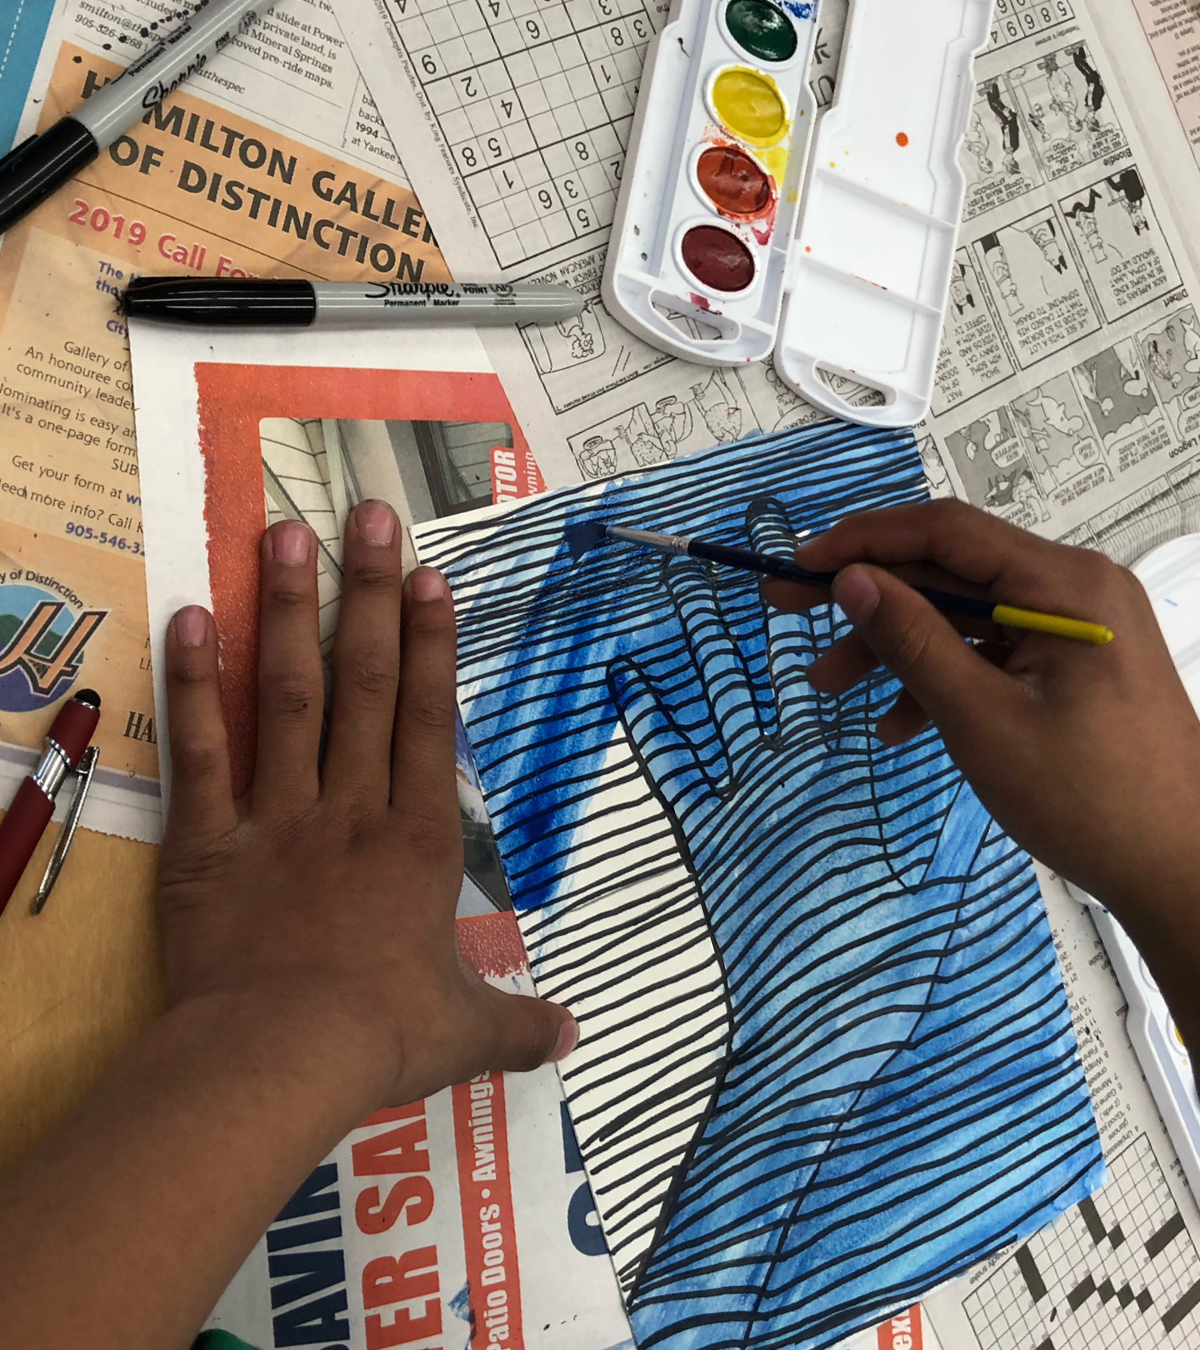 Student hands painting a striped artwork of a hand.